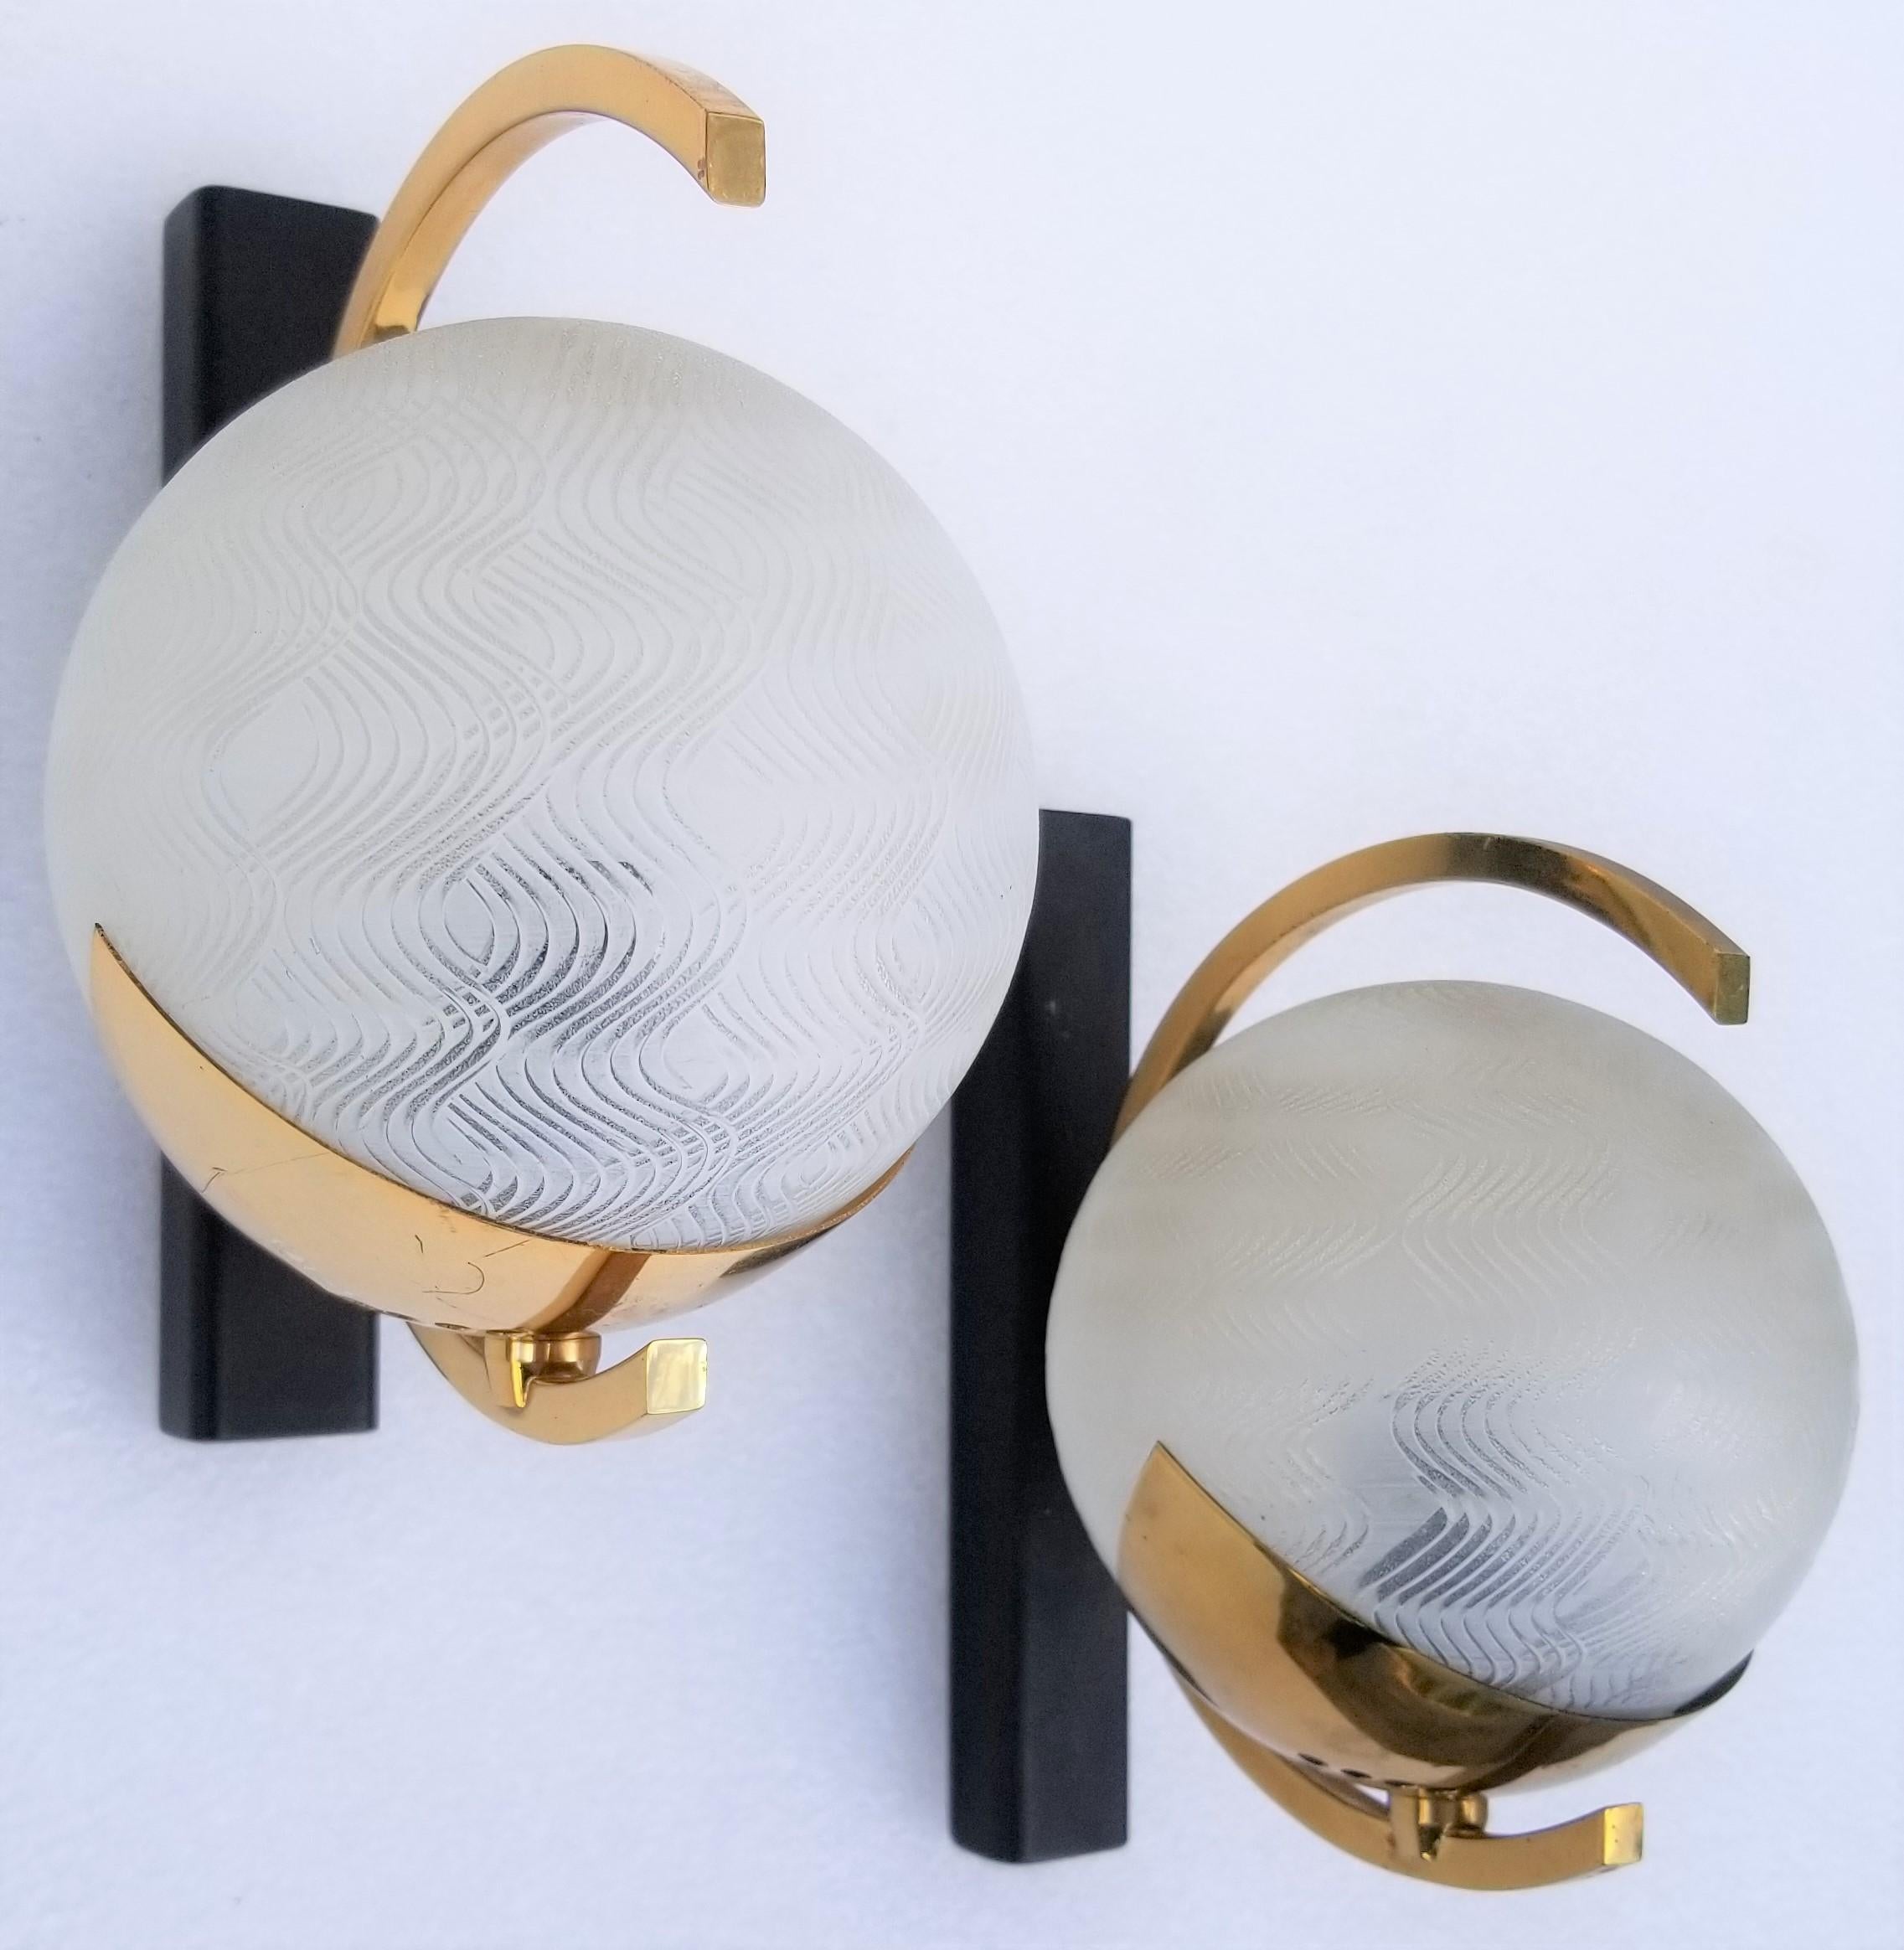 Maison Arlus French brass modernist pair of sconces.
US rewired and in working condition
One light, 25 watts max bulb.
Custom back plate available.